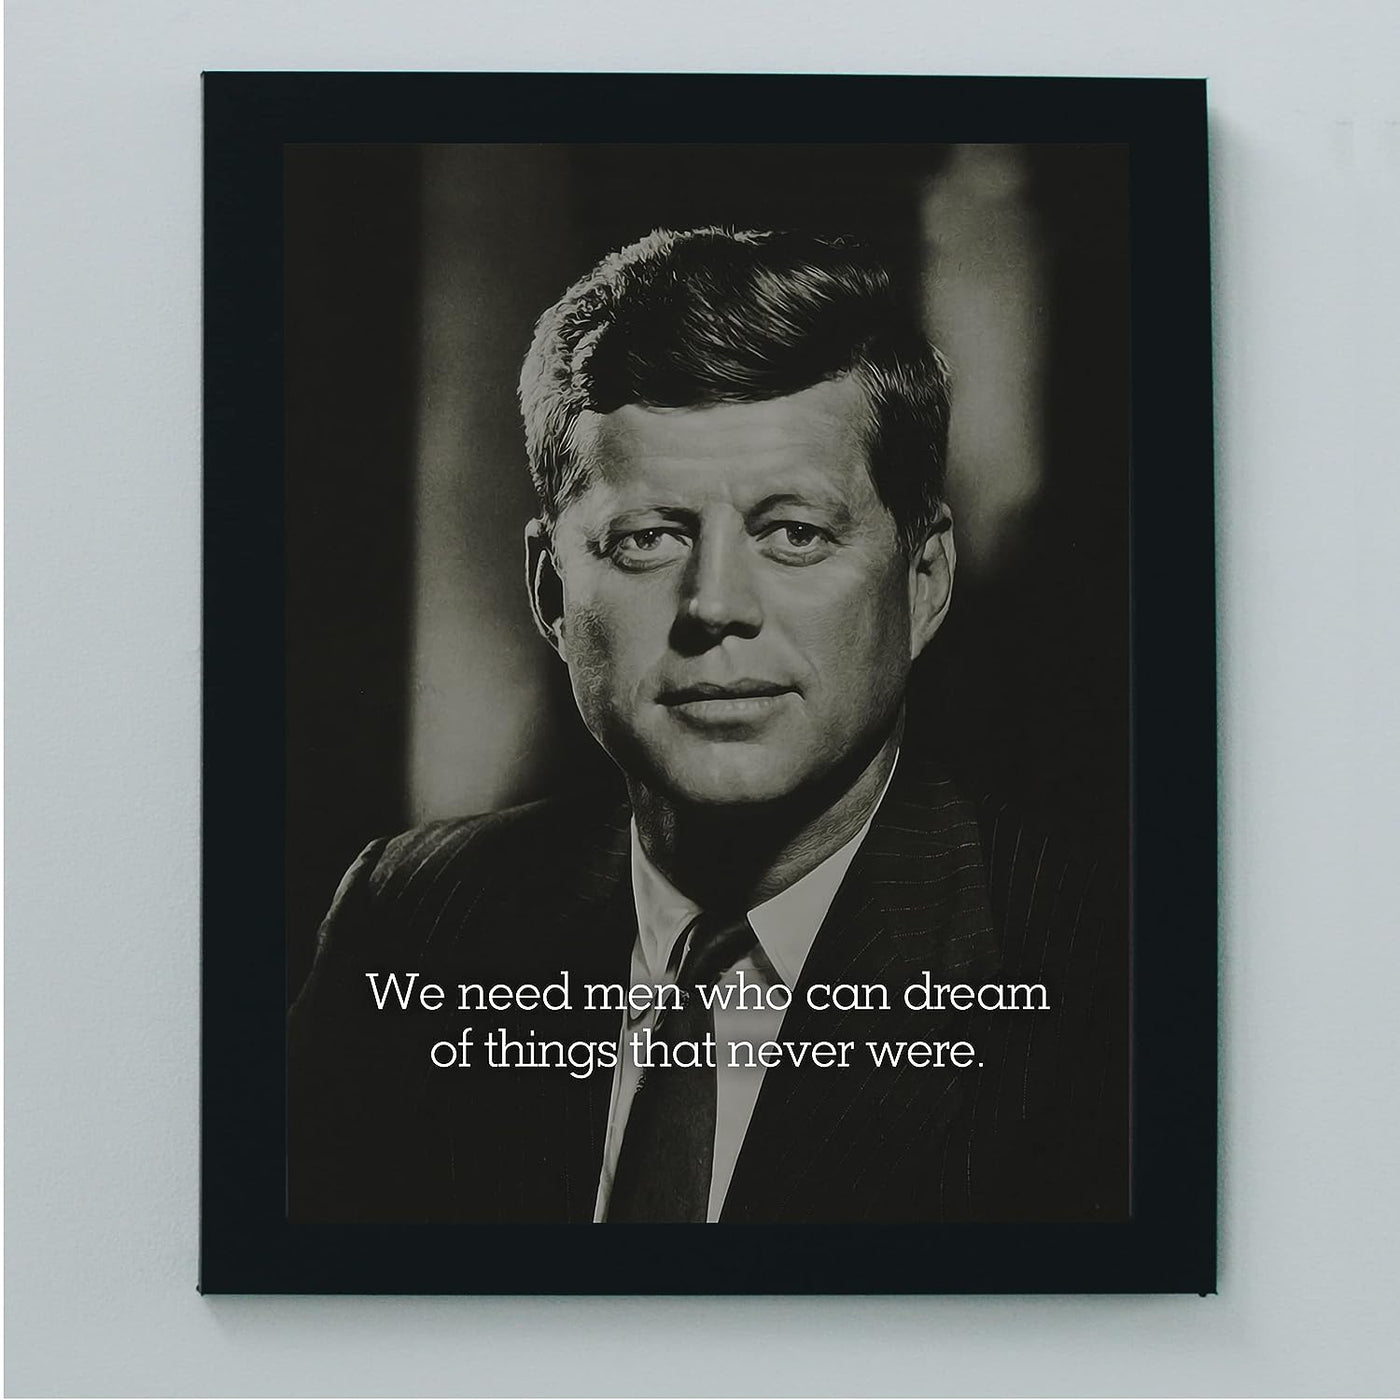 John F. Kennedy Quotes-"We Need Men Who Can Dream"-Political Wall Art -8 x 10" JFK Presidential Portrait Print -Ready to Frame. Patriotic Home-Office-School-Library Decor! Great Historical Gift!